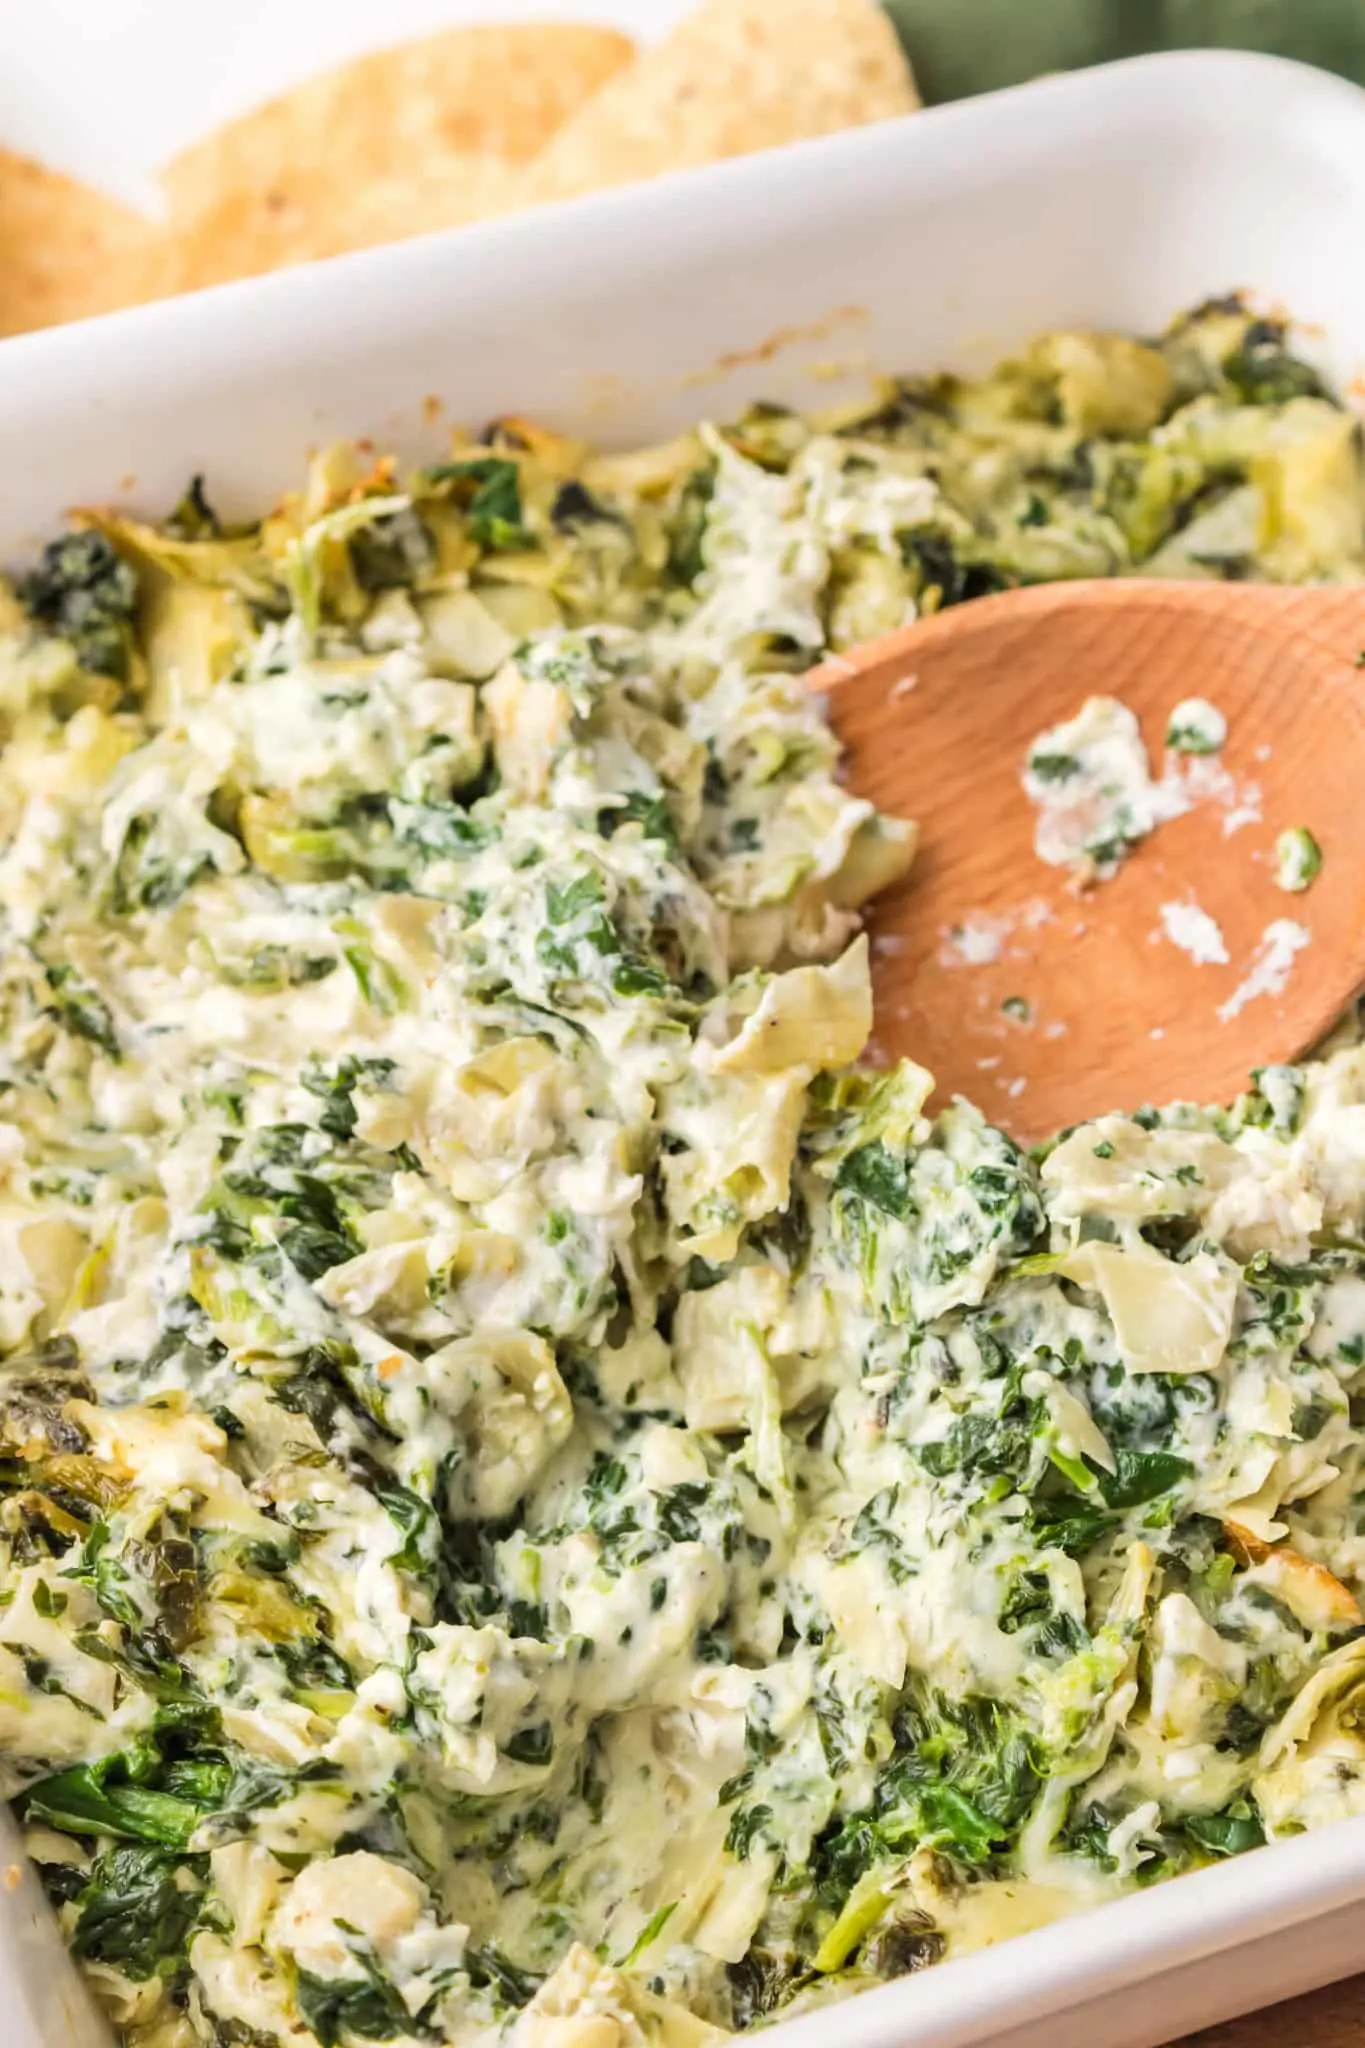 Spinach Artichoke Dip is a creamy baked dip recipe loaded with chopped artichoke hearts, spinach, cream cheese, parmesan and mozzarella.